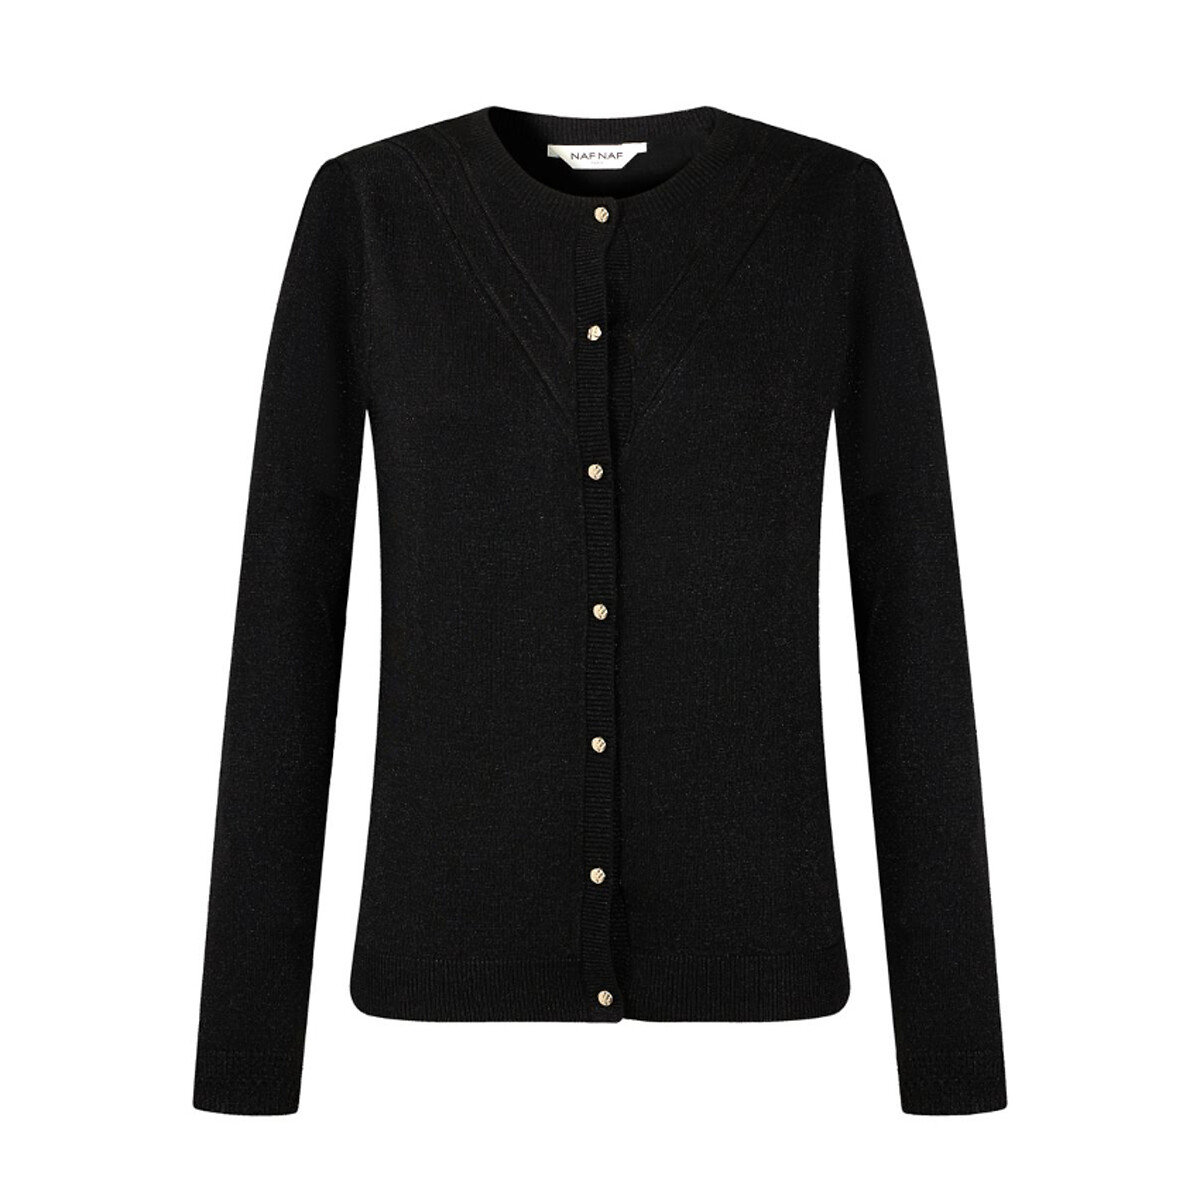 Image of Buttoned Openwork Knit Cardigan with Crew Neck